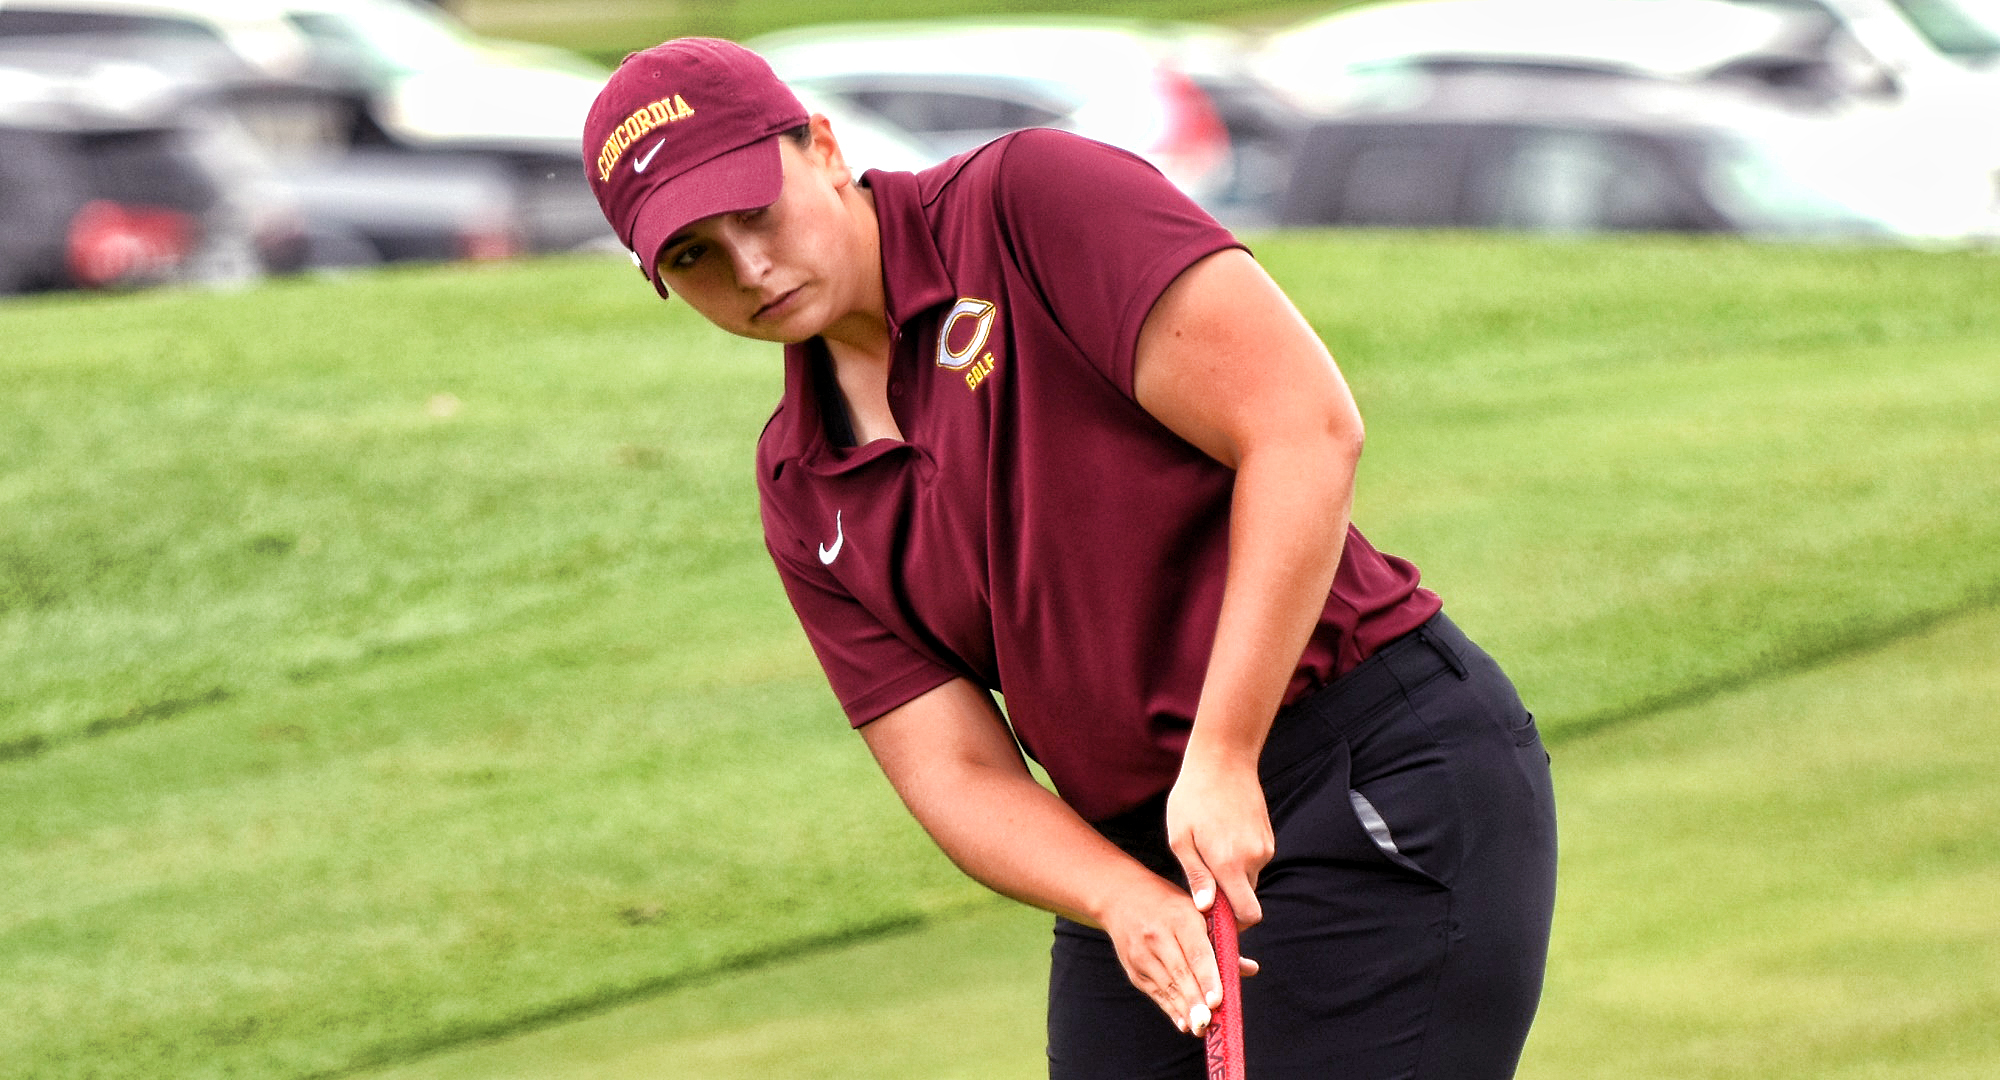 Junior Bailey Klause led Concordia at the DIII Classic. She improved by six shots on the final day as she shot a career-best 79.